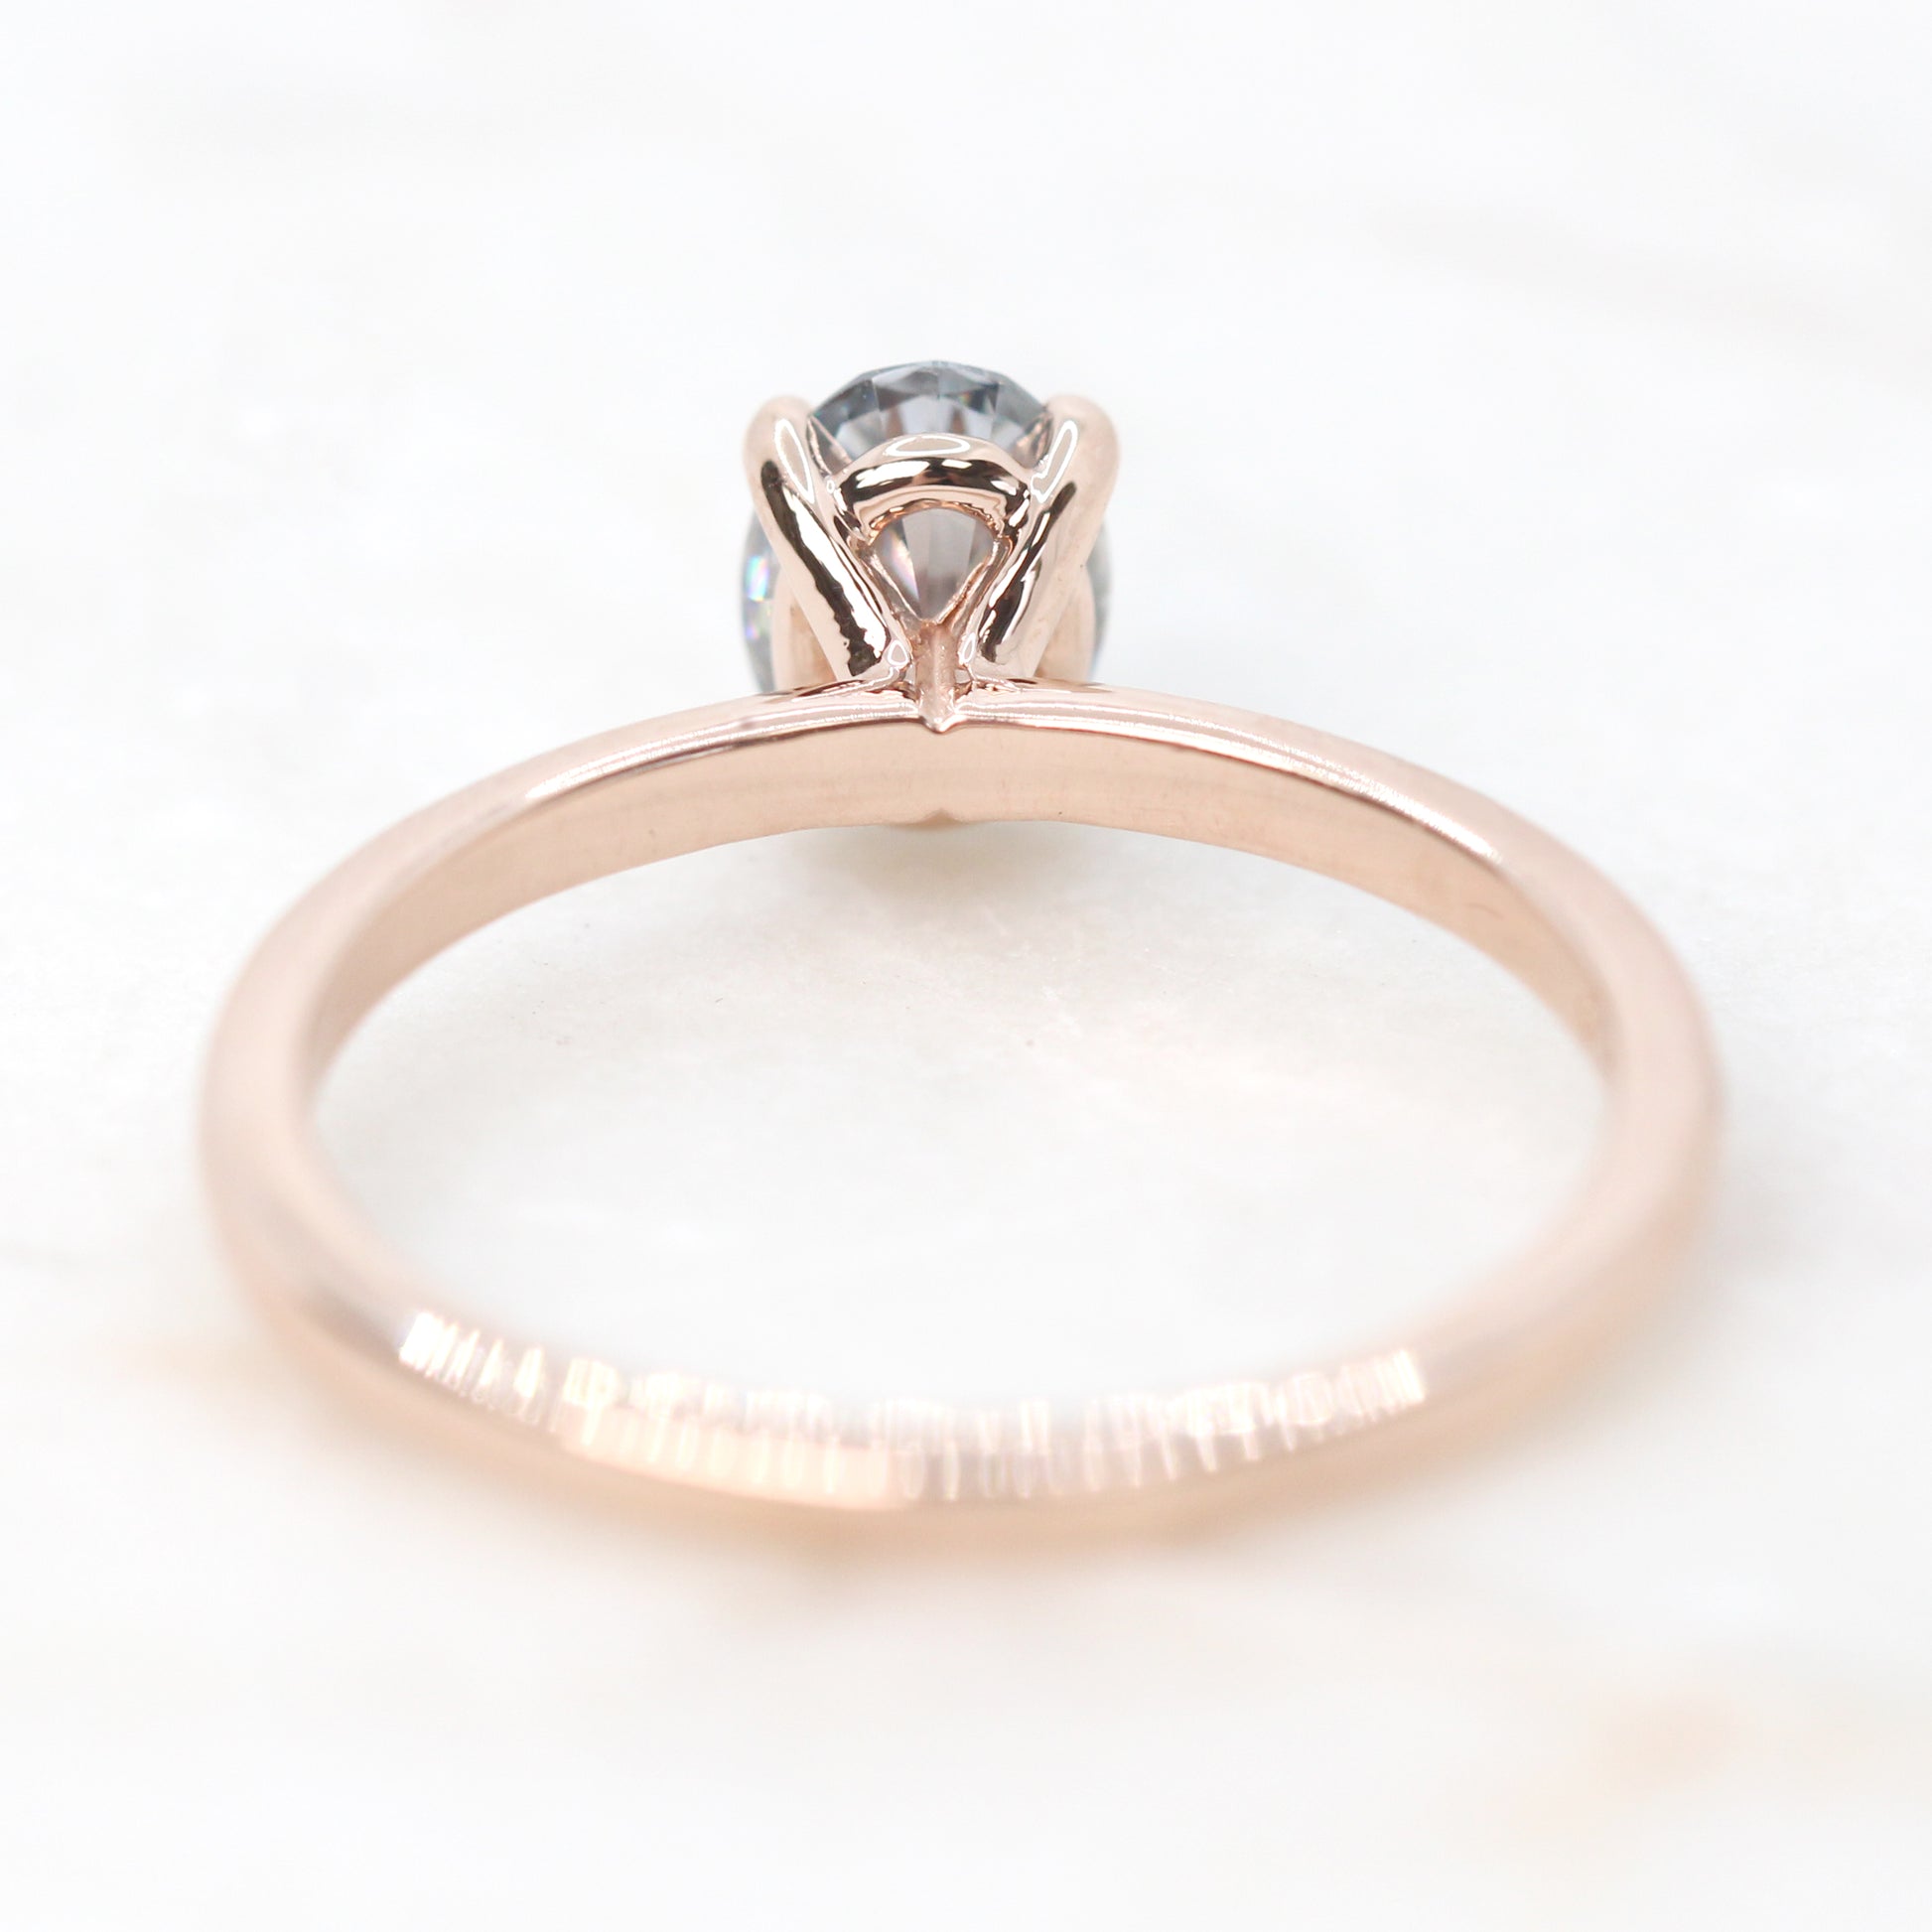 Emma Ring with a 0.8 Carat Oval Gray Moissanite - Made to Order, Choose Your Gold Tone - Midwinter Co. Alternative Bridal Rings and Modern Fine Jewelry